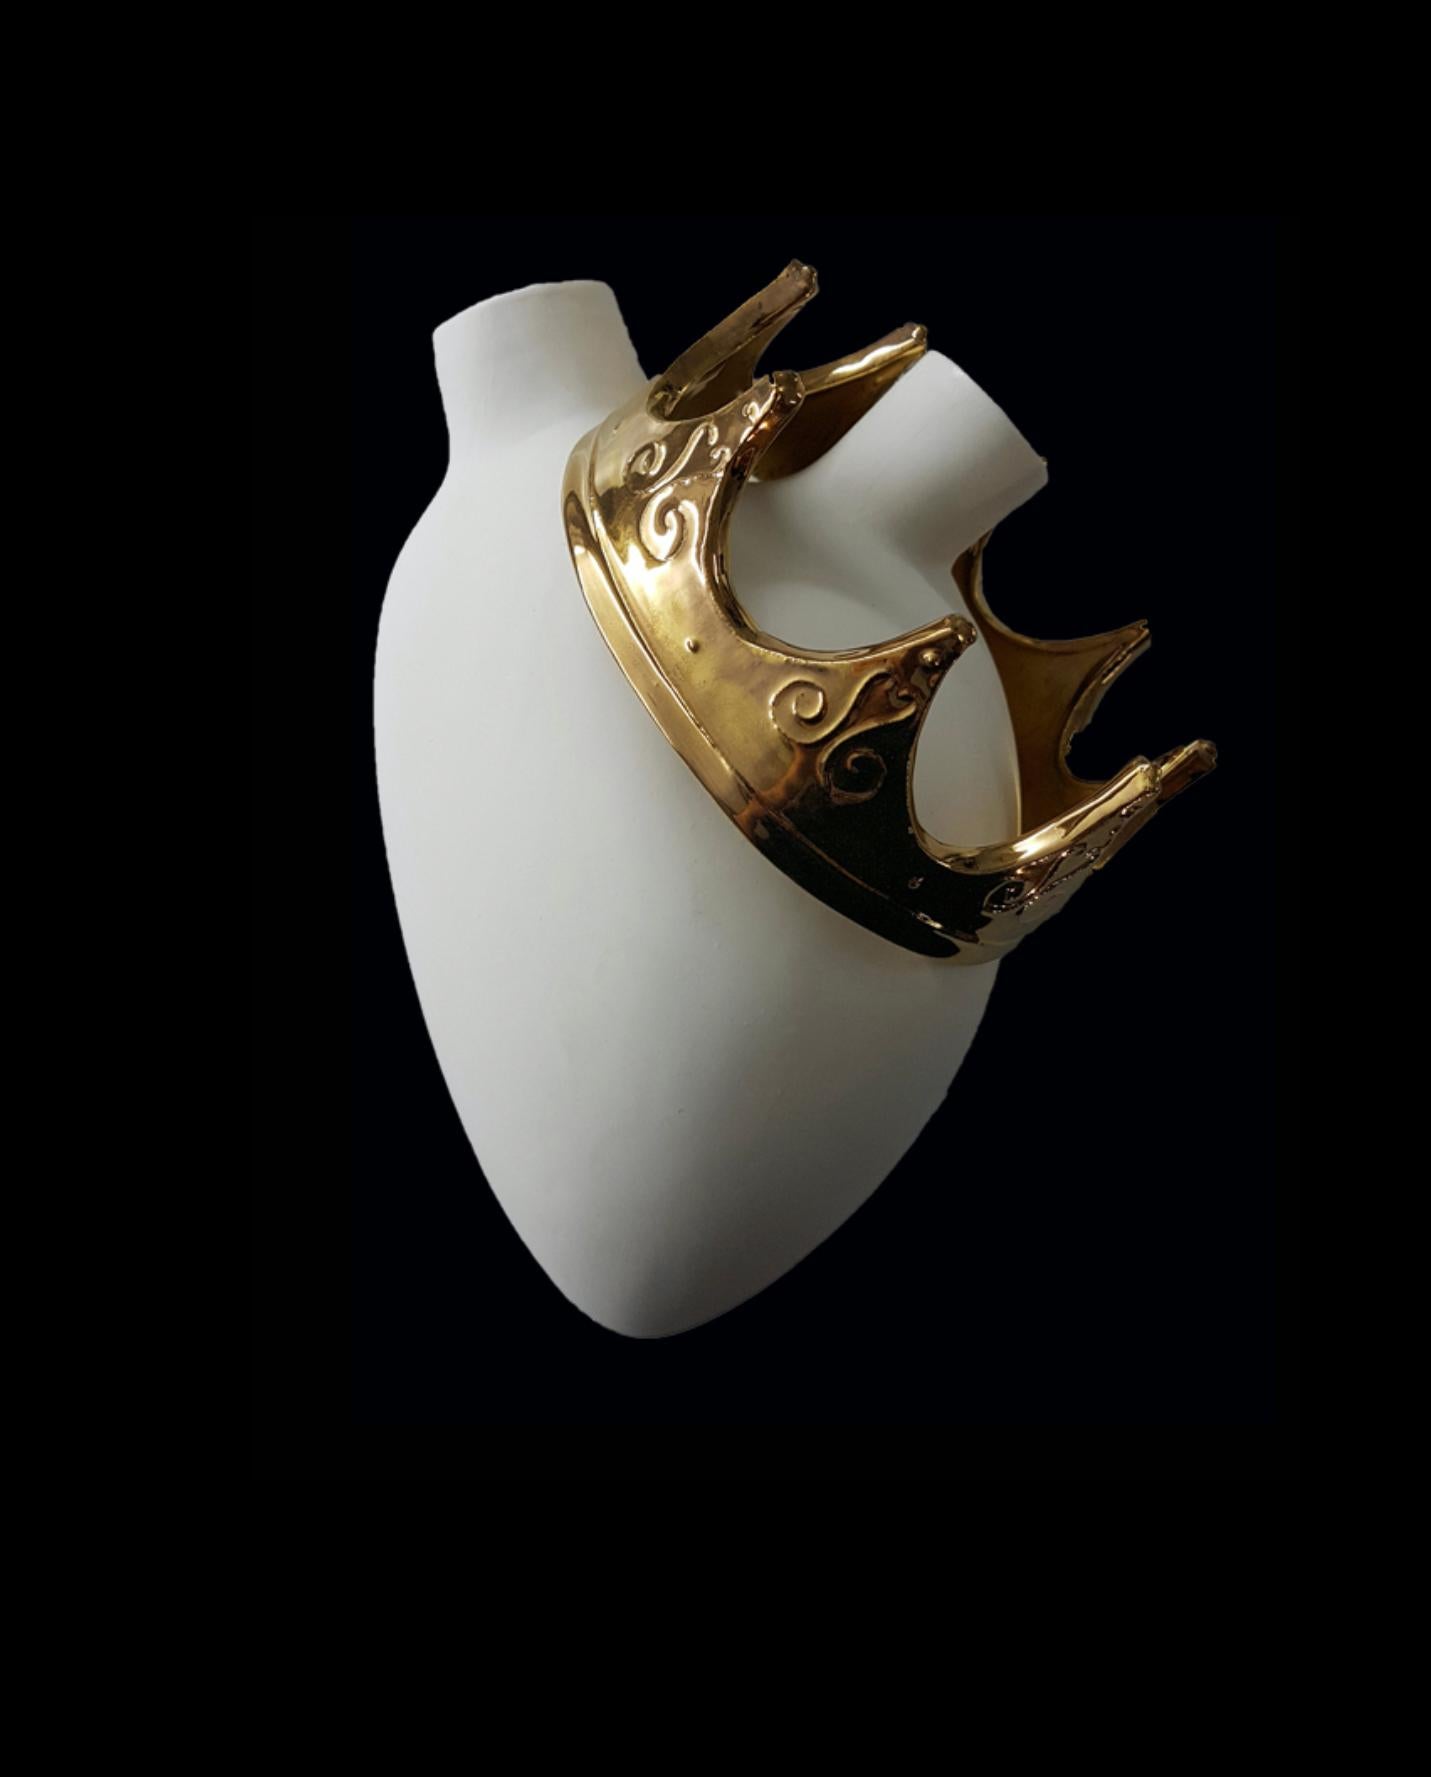 A special collection of hand made italian luxury vases. 

Includes 

Heart # 47
Heart # 8
Heart # 55
Heart # 10
Heart # 48.
 